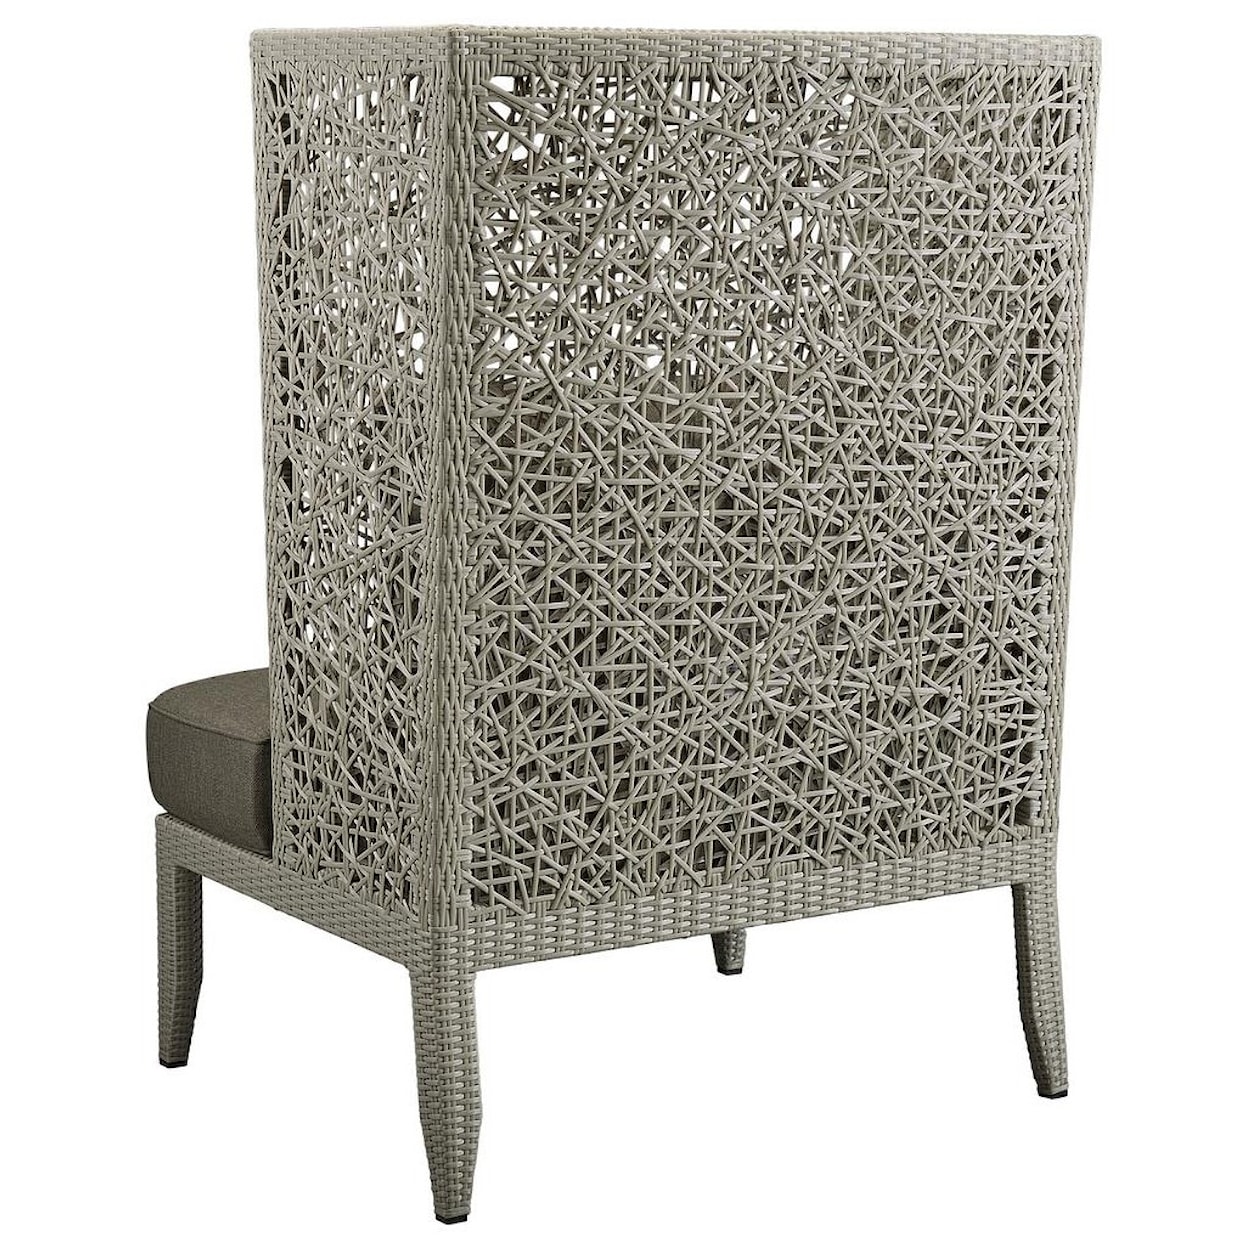 Furniture Classics Outdoor Grand Haven Chair